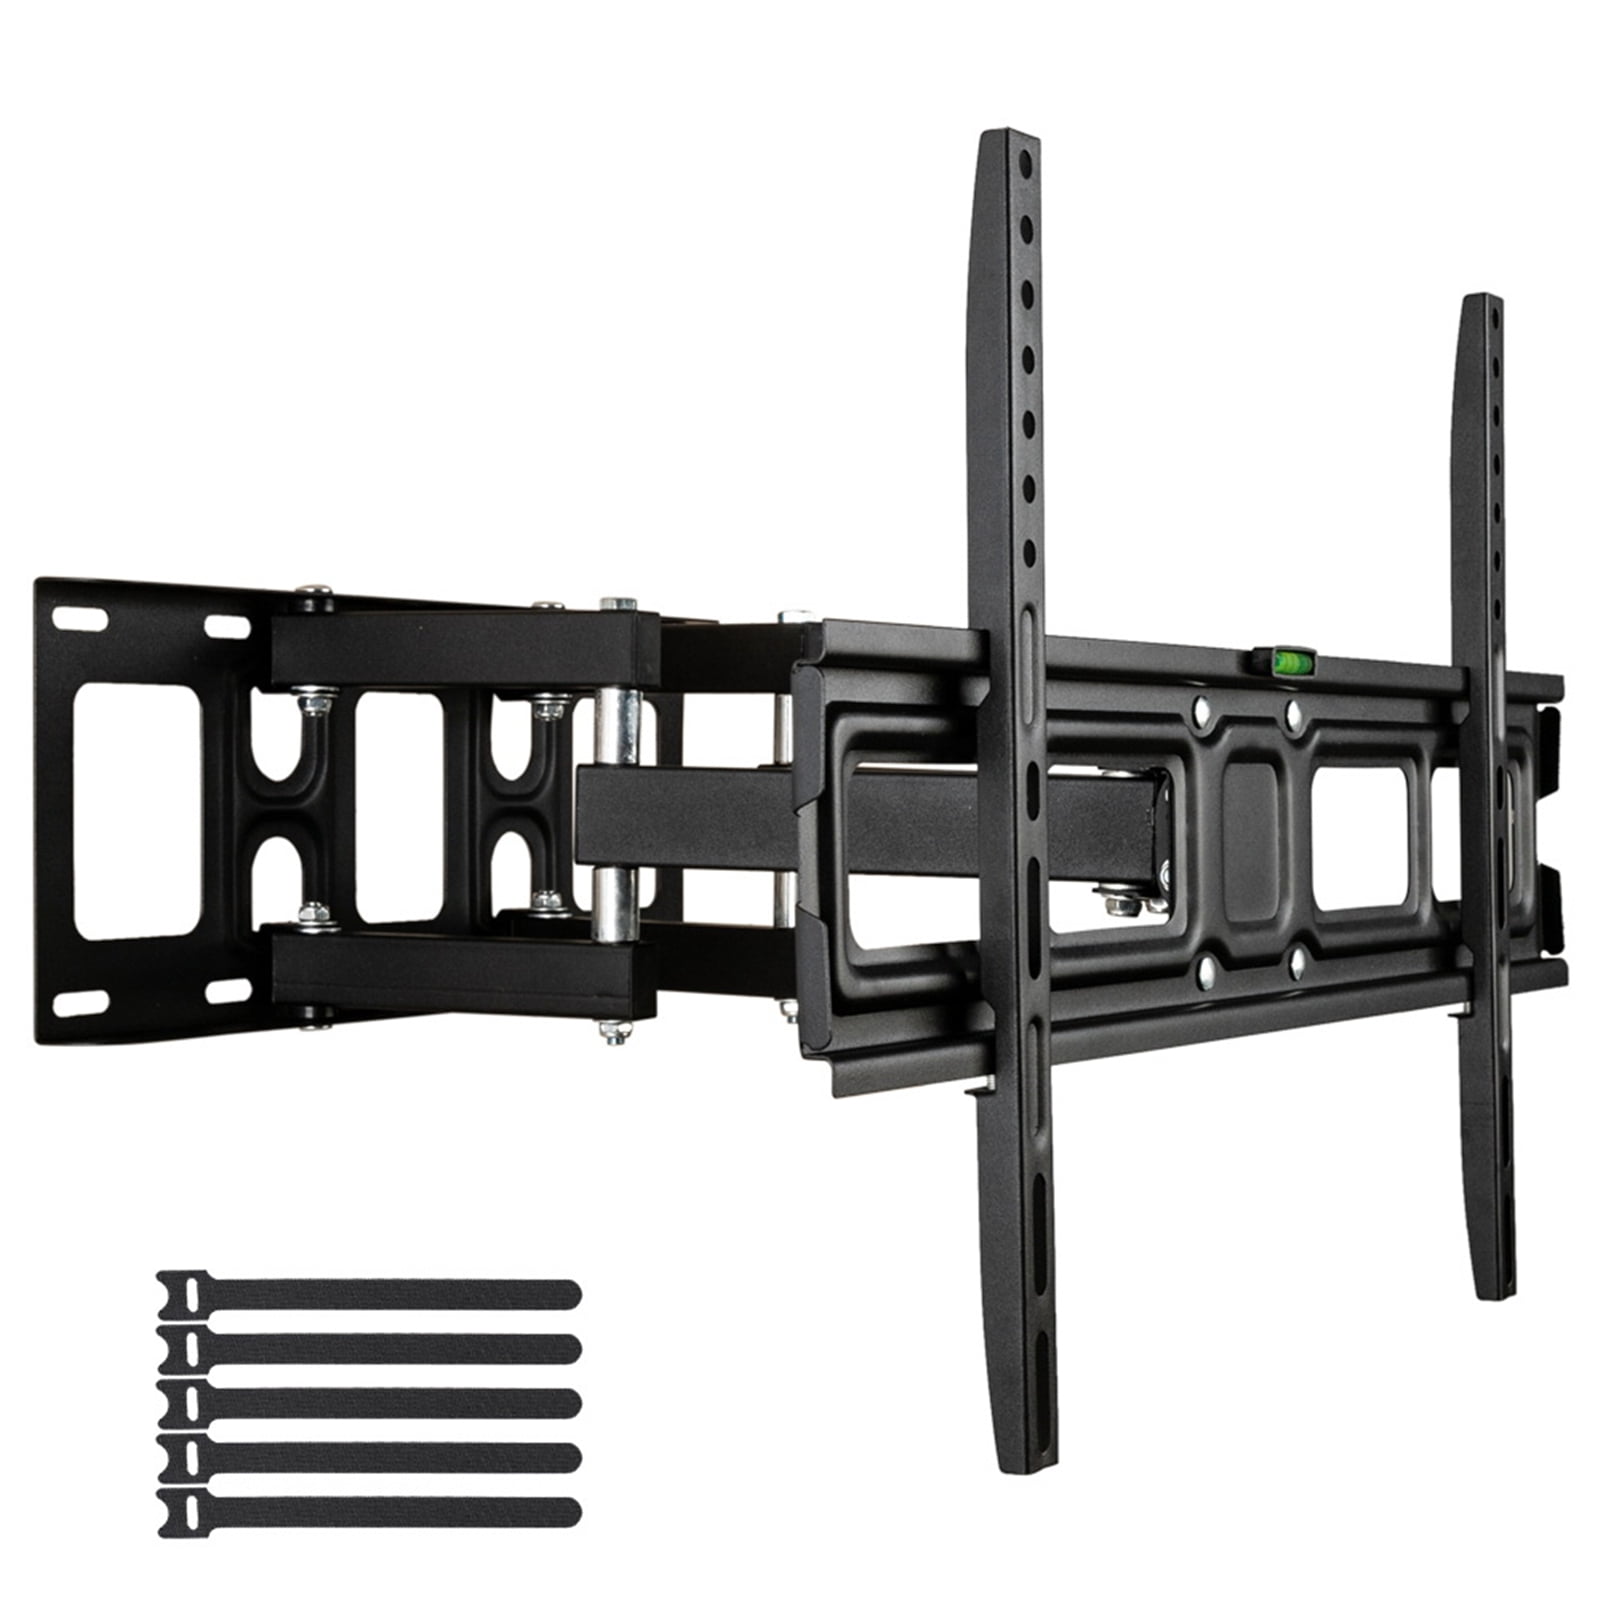 32-70" Wall Mount Bracket TV Stand with Spirit Level Bearing 50kg 600 x 400mm US 